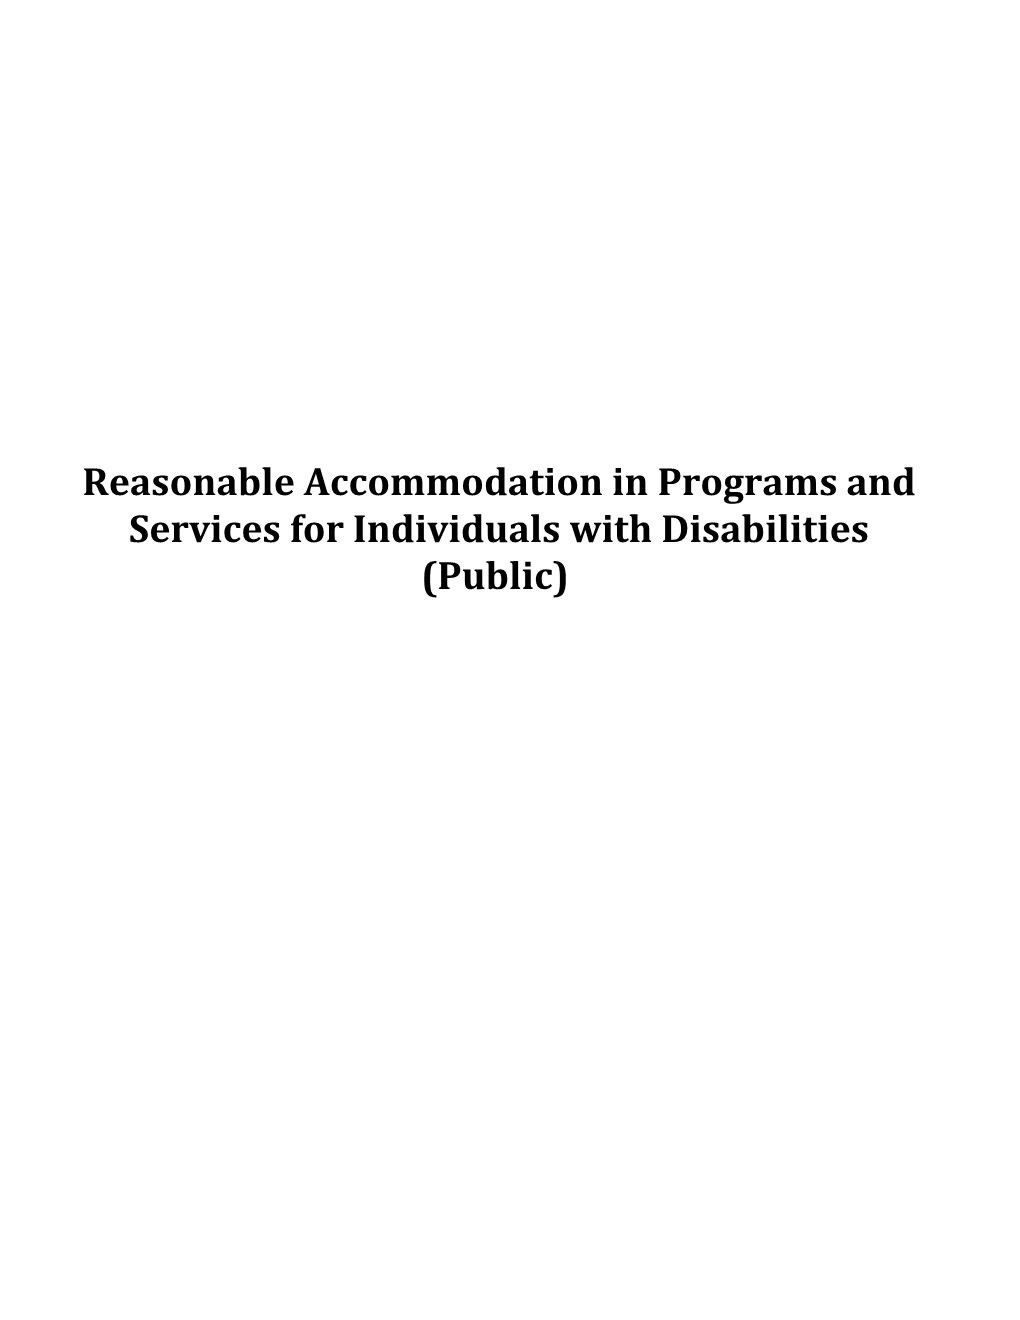 Reasonable Accommodation in Programs and Services for Individuals with Disabilities